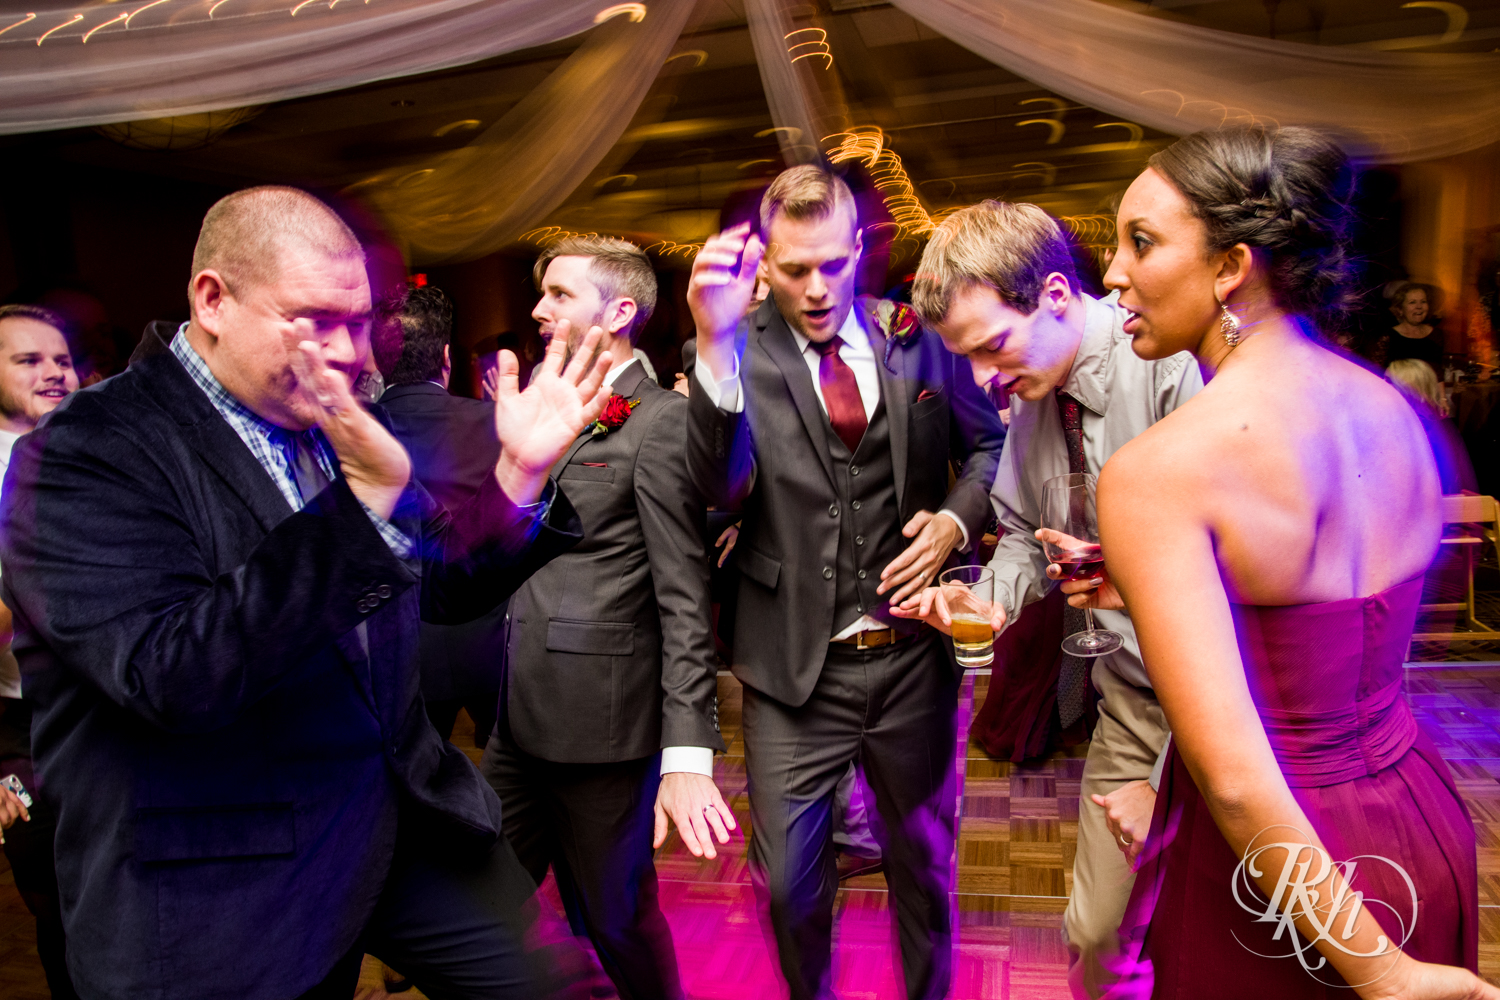 Guests dance at wedding reception at at Courtyard by Marriott Minneapolis.